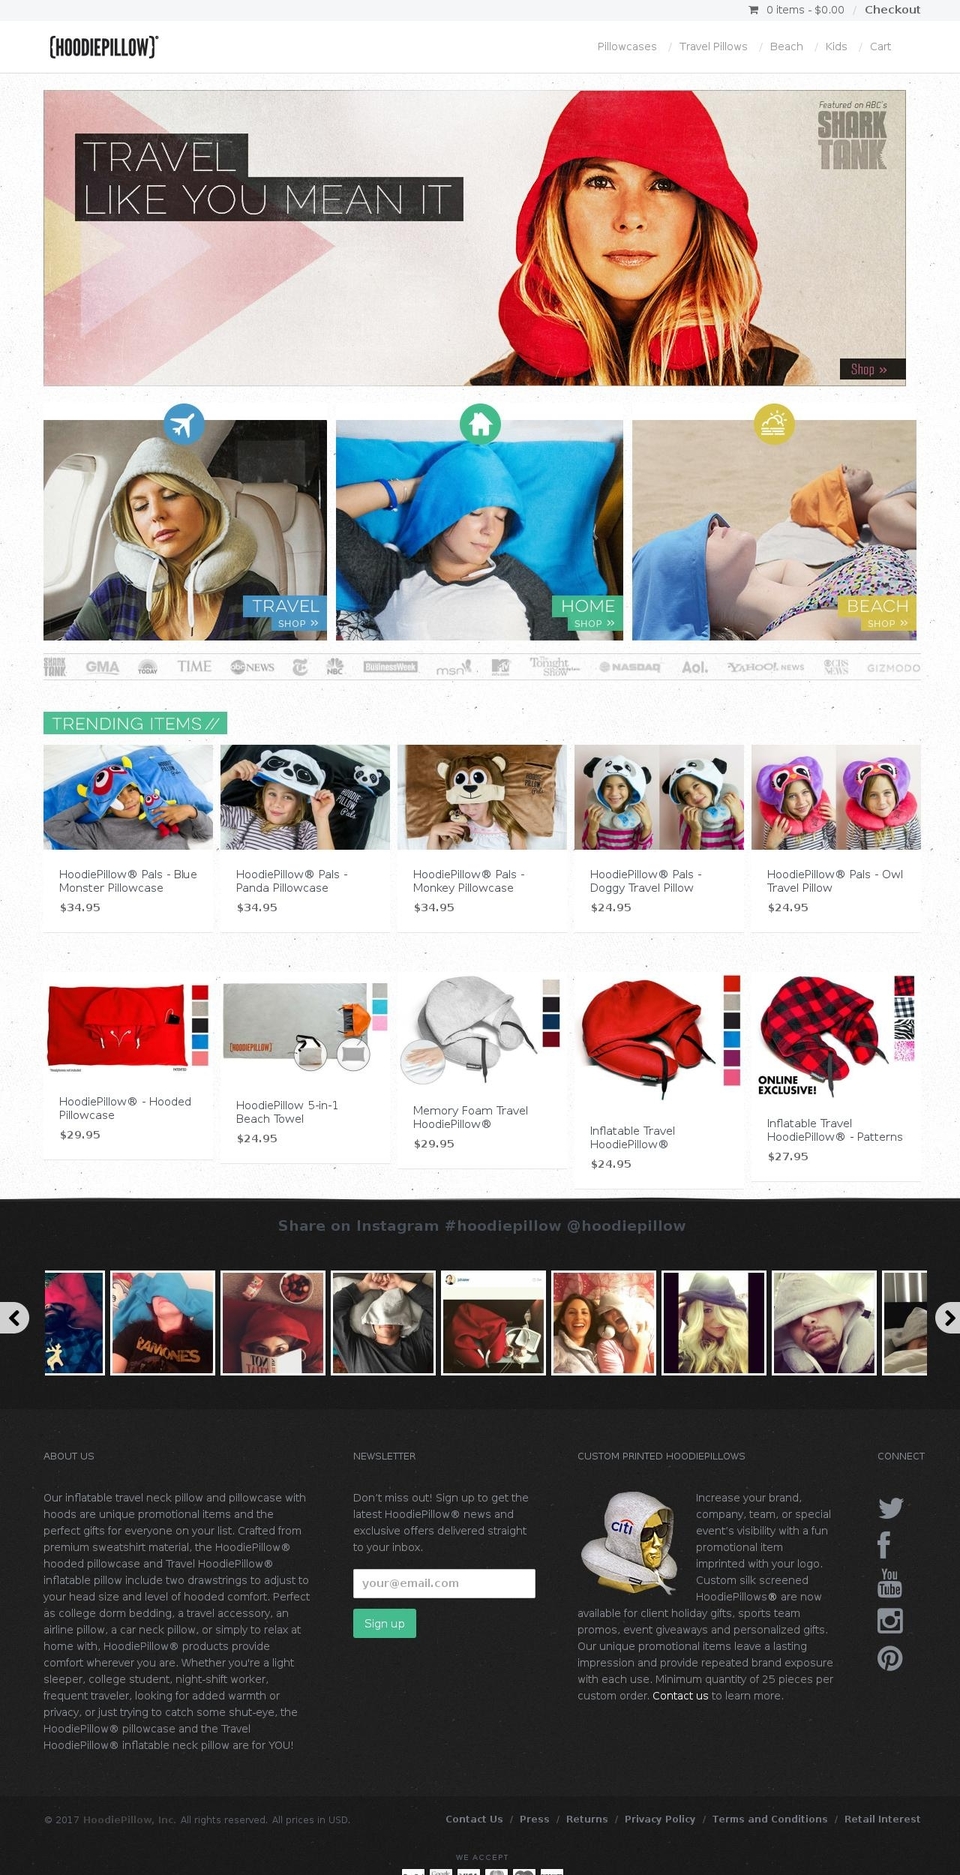 Copy of Providence Shopify theme site example buyhoodypillows.com